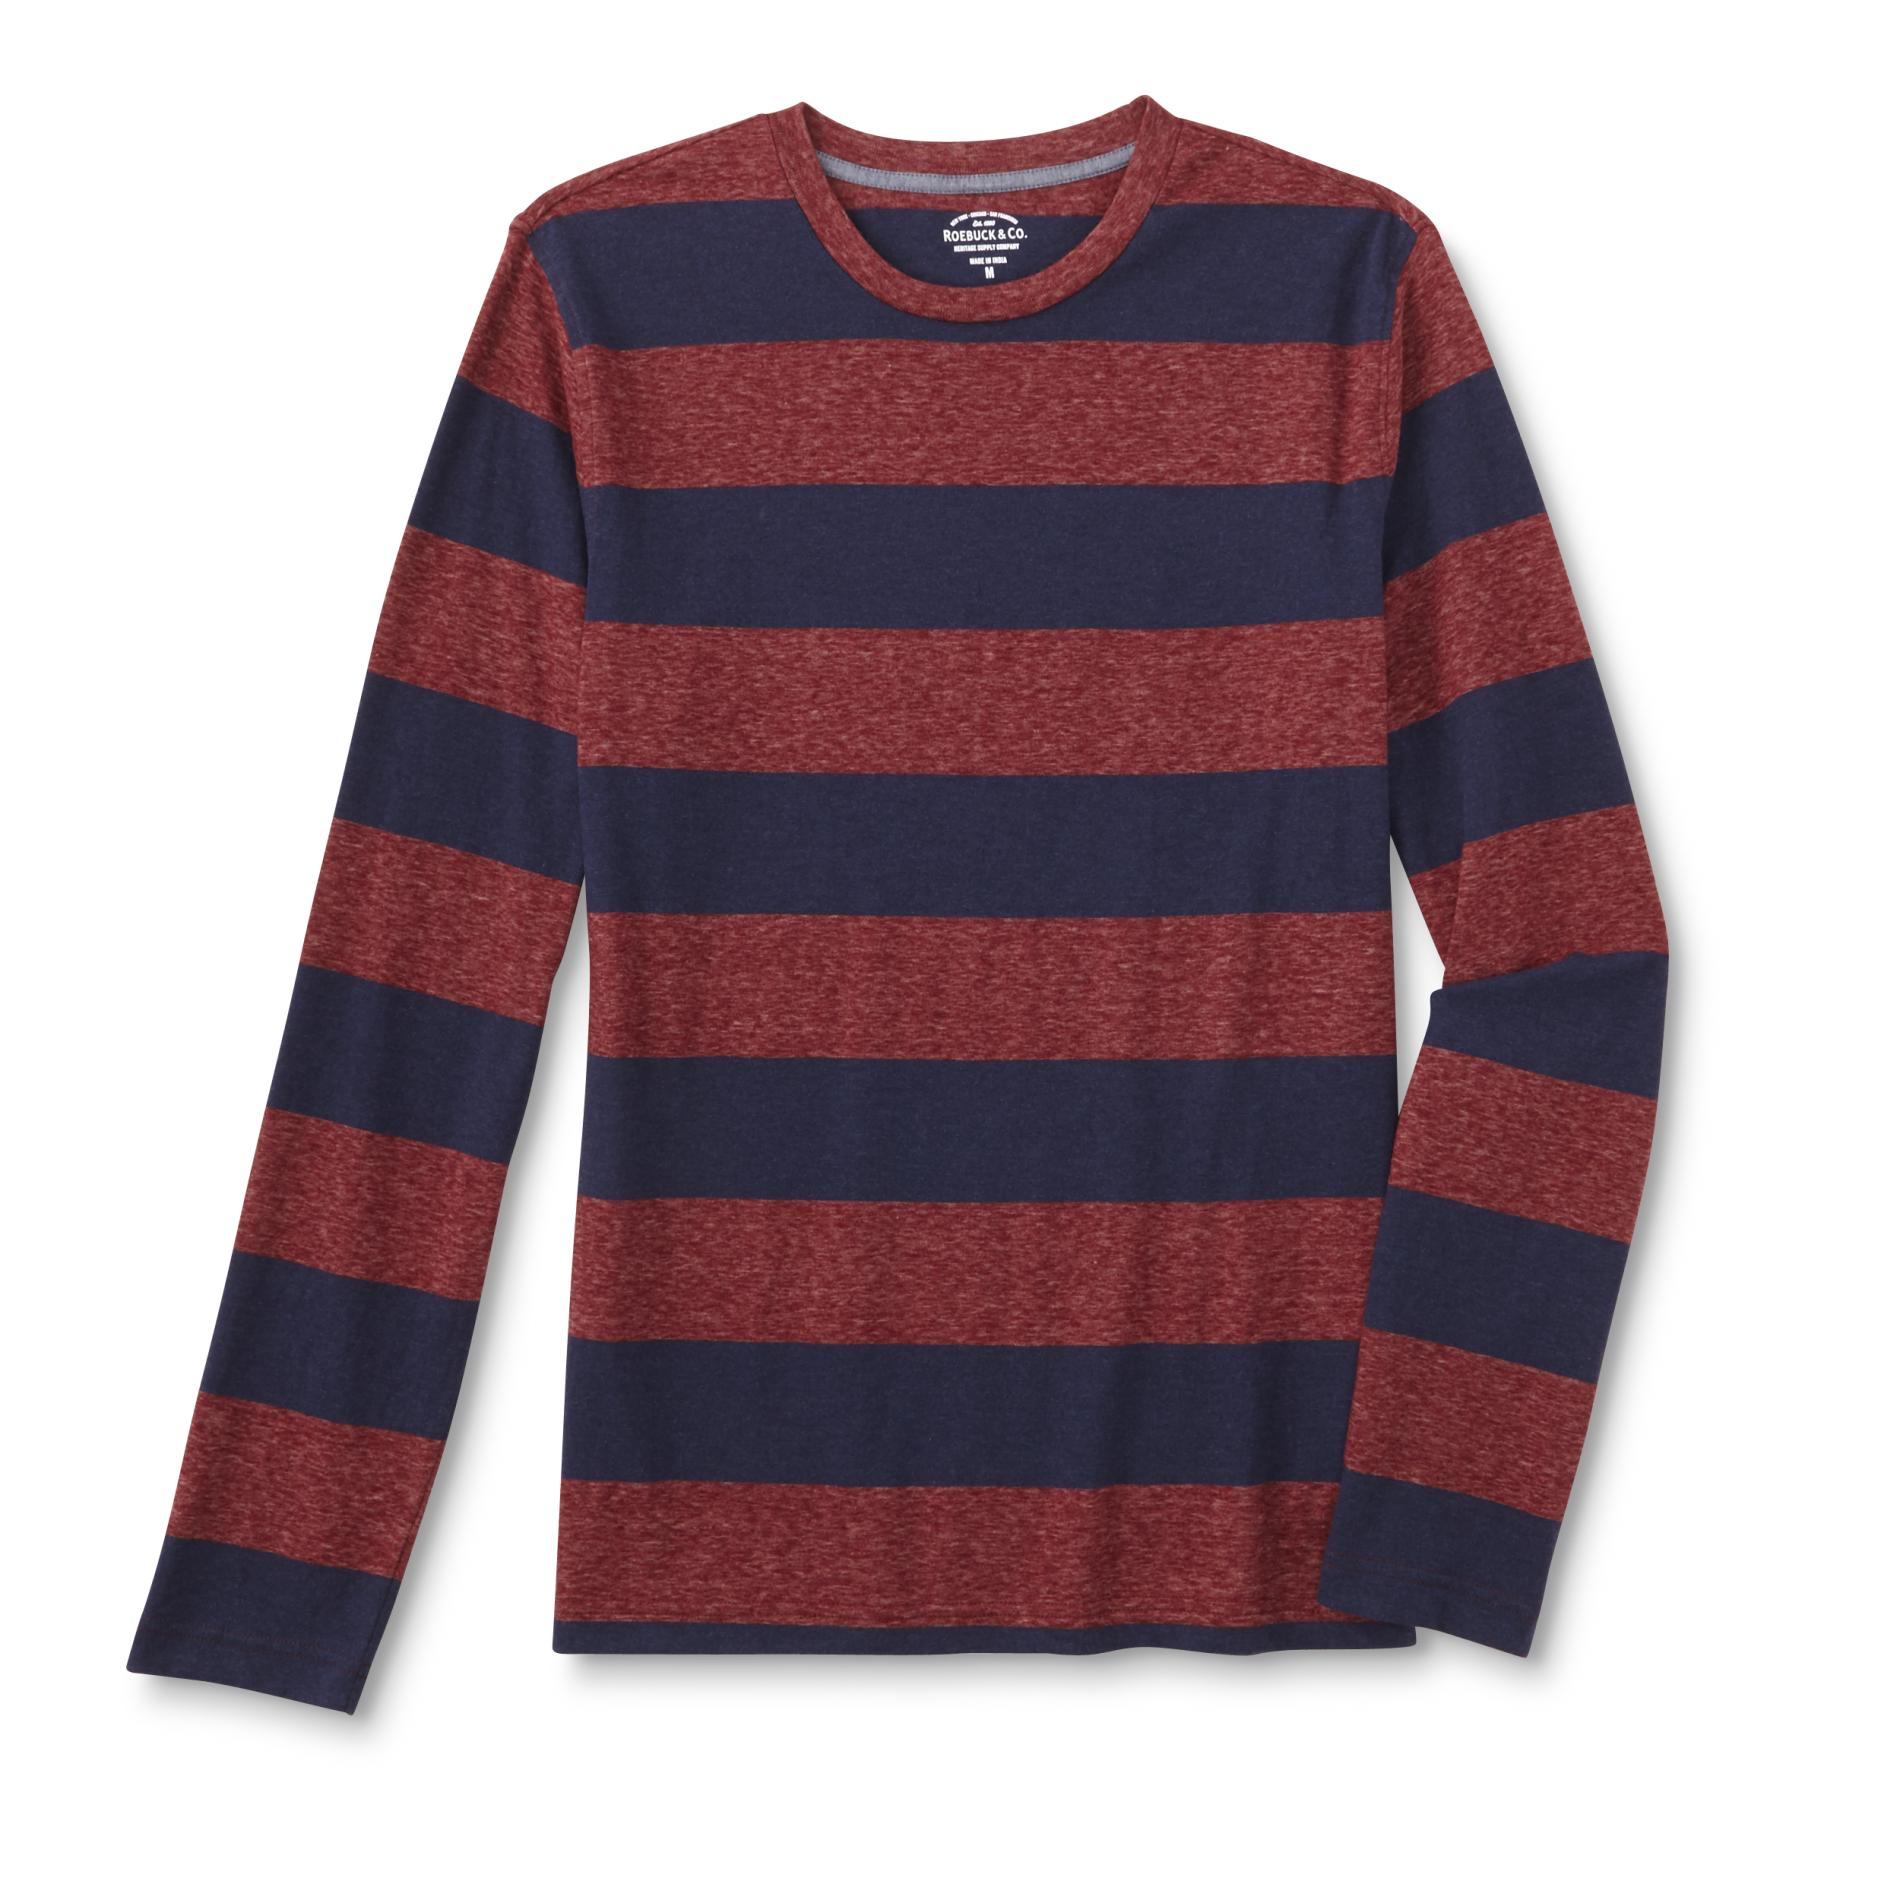 Roebuck & Co. Young Mens Long Sleeve T Shirt   Rugby Striped   